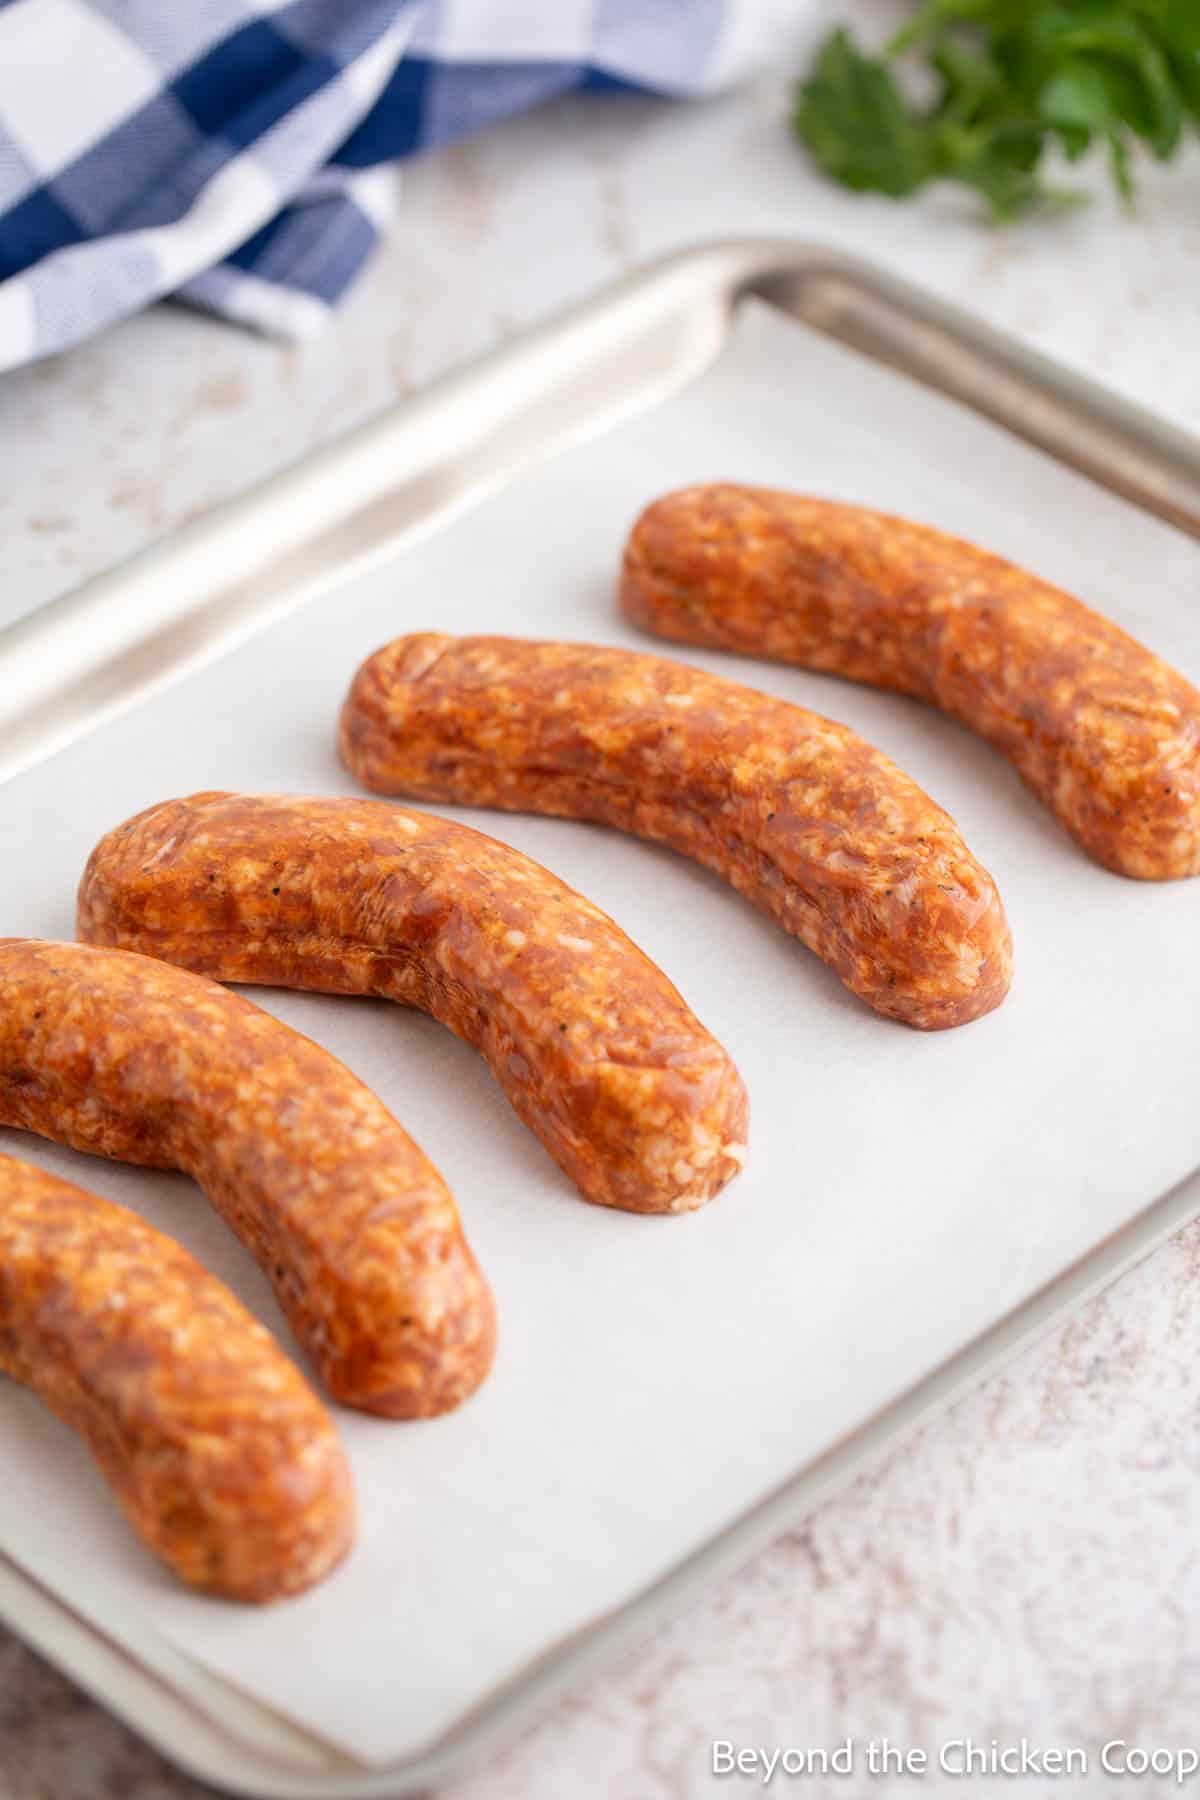 Unbaked sausage links on a baking sheet. 